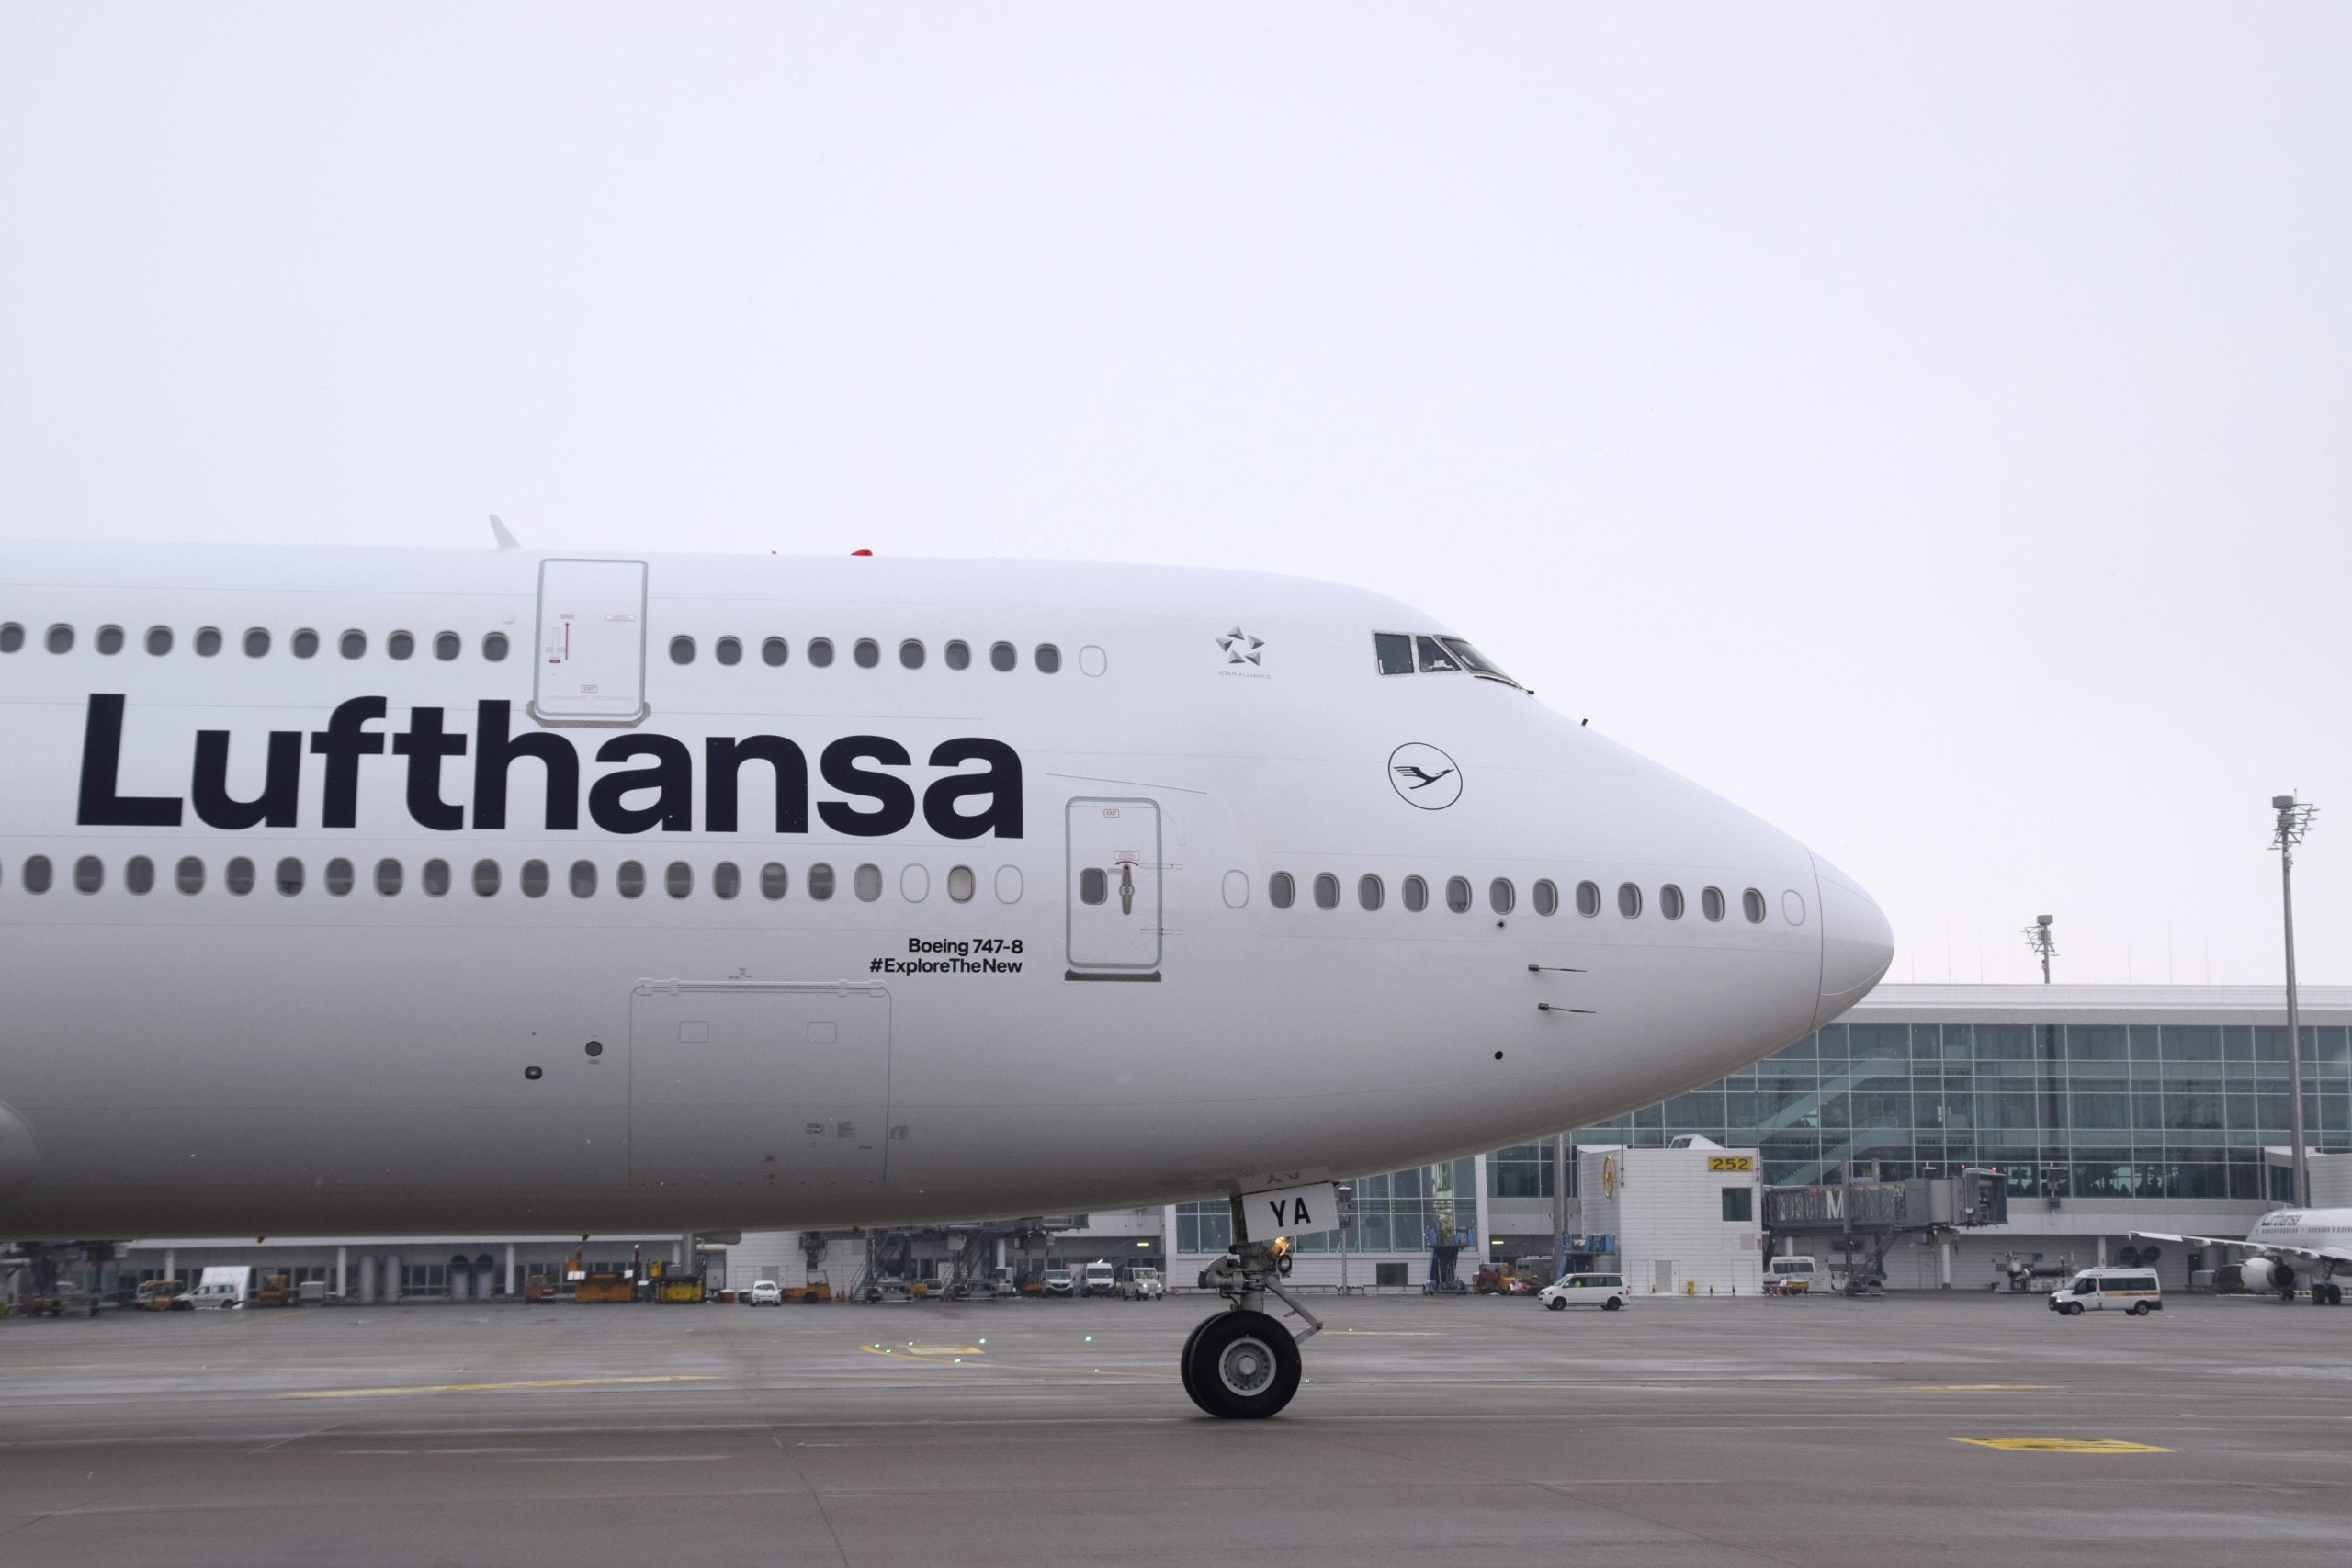 No rebooking fees for Lufthansa Group flights